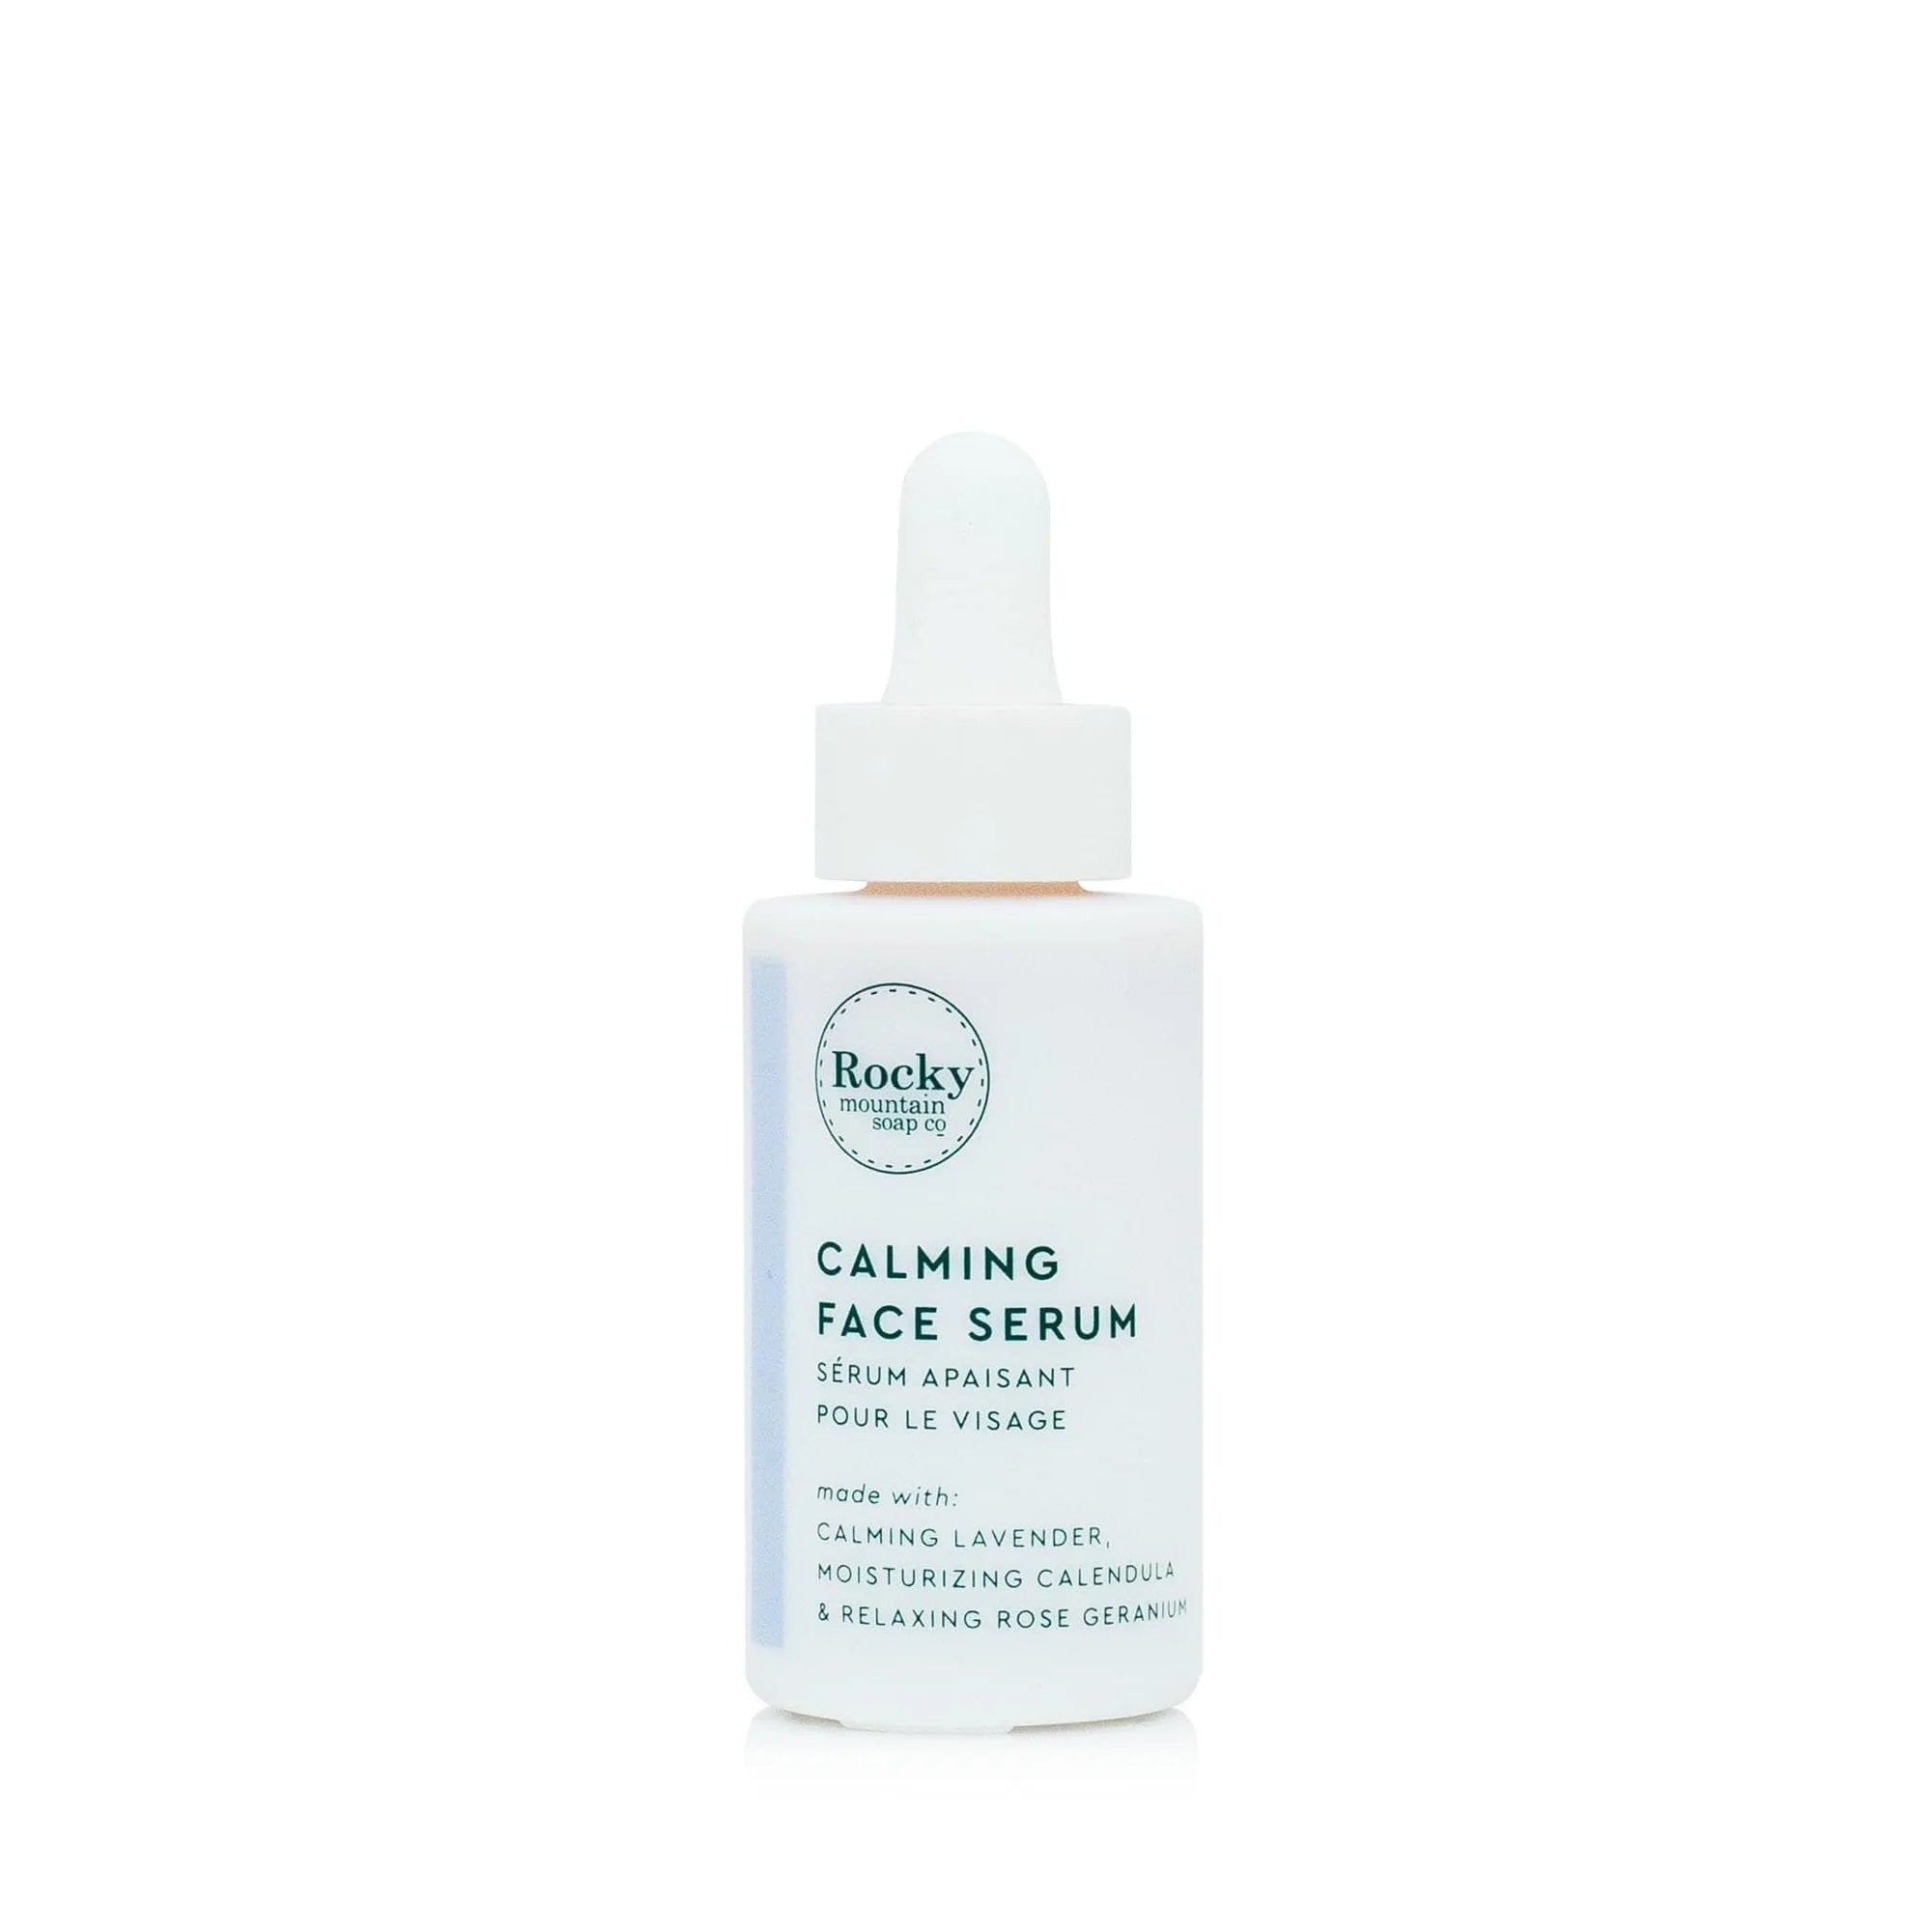 Calming Natural Face Serum by Rocky Mountain Soap Company